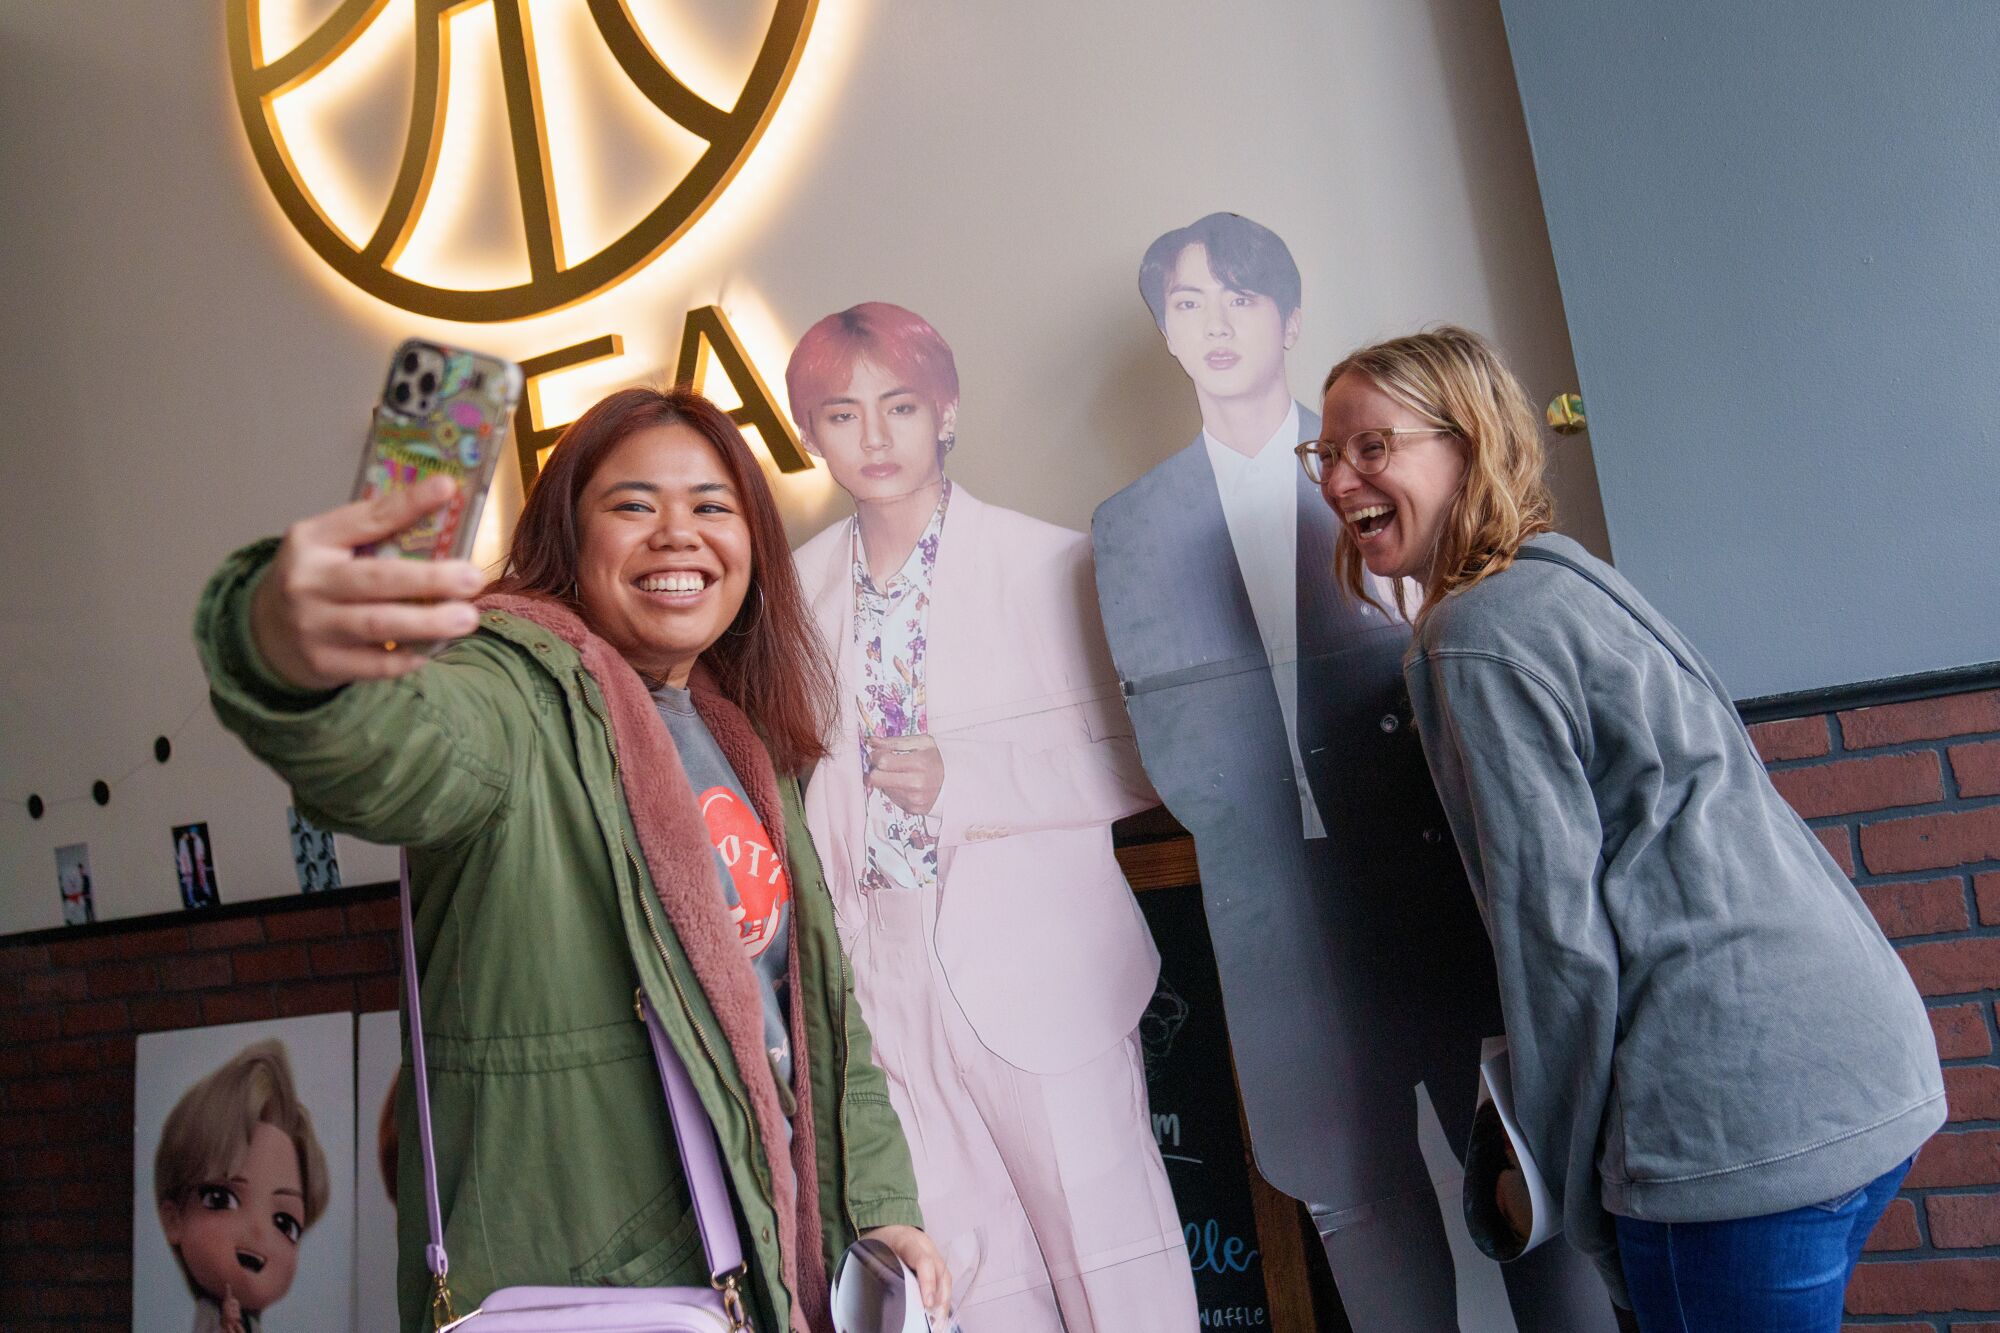 Caitlin Baul, and Traci Doramal take a selfie with cut outs during a cupsleeve event at R&B Tea.